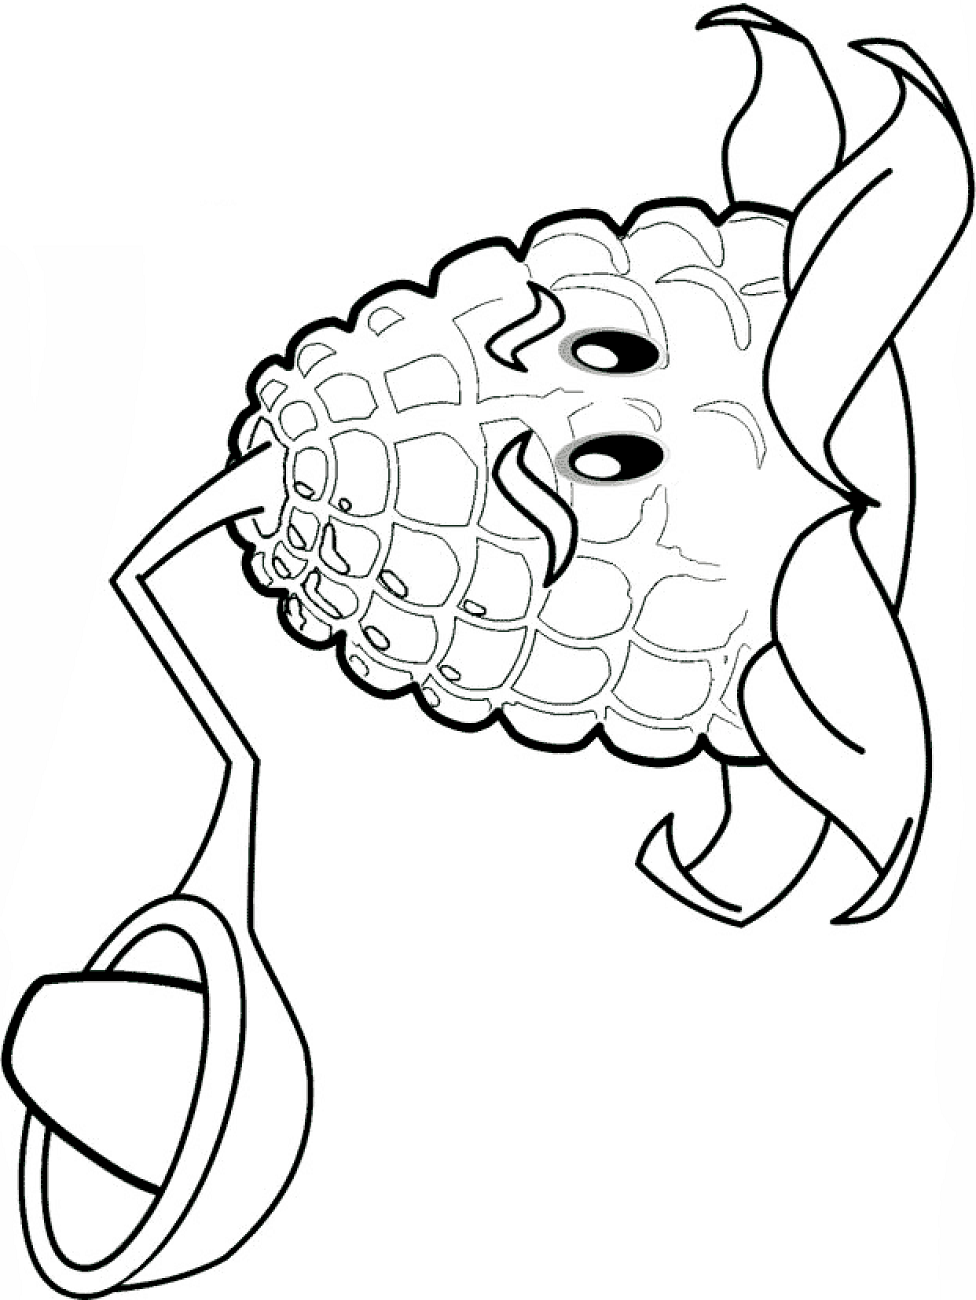 Plant Kernel Pult Coloring Page - Free Printable Coloring Pages for Kids